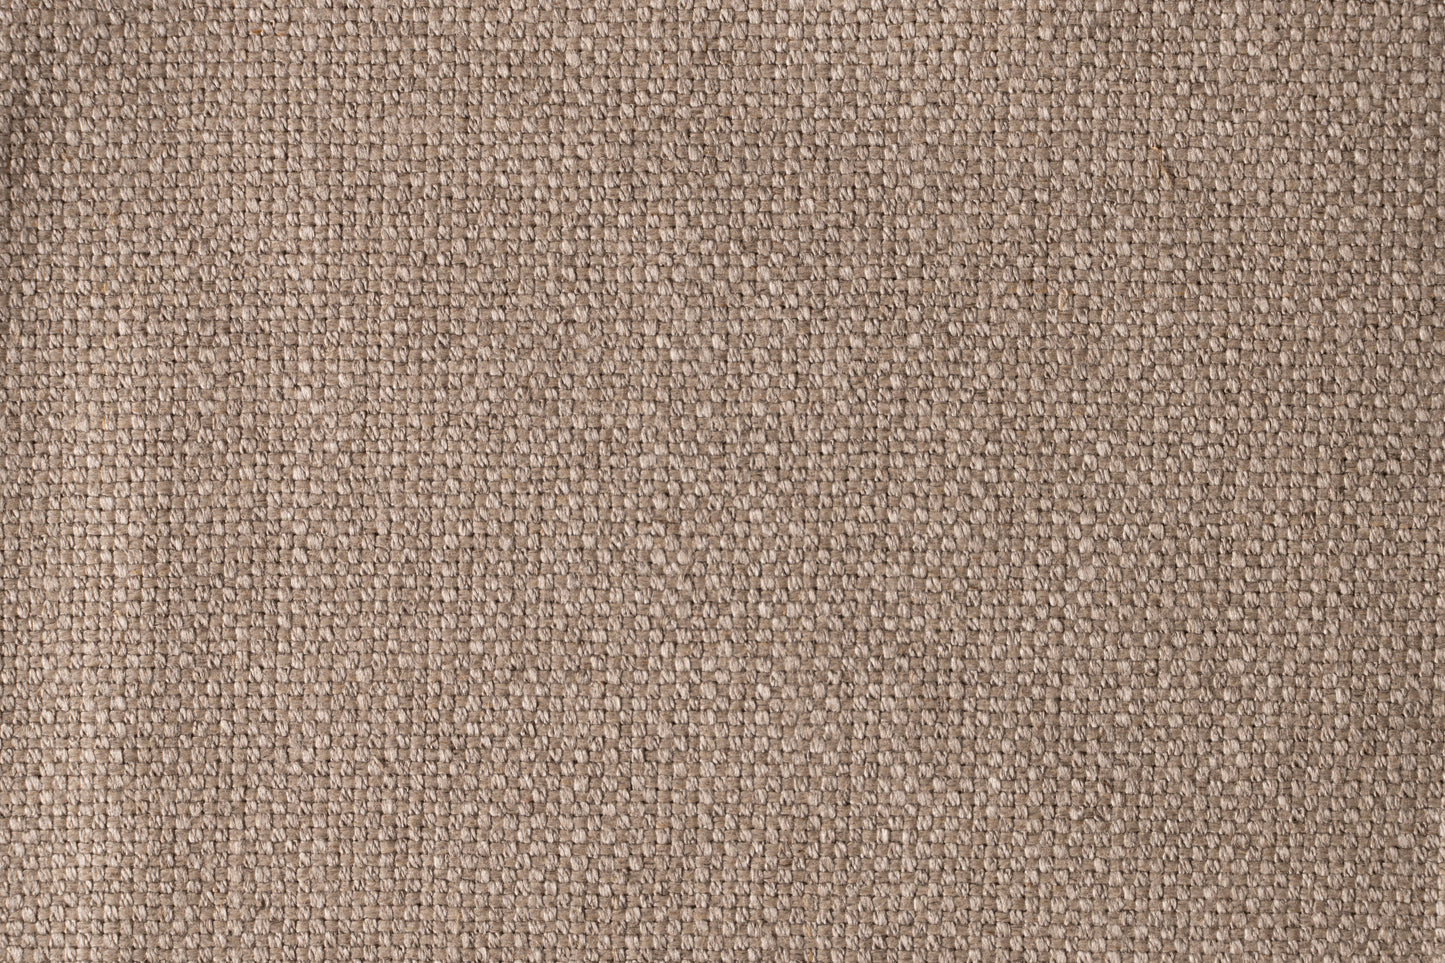 14.5 oz/sq yard 100% Upholstery Weight Linen in White – Mary Claret Studio